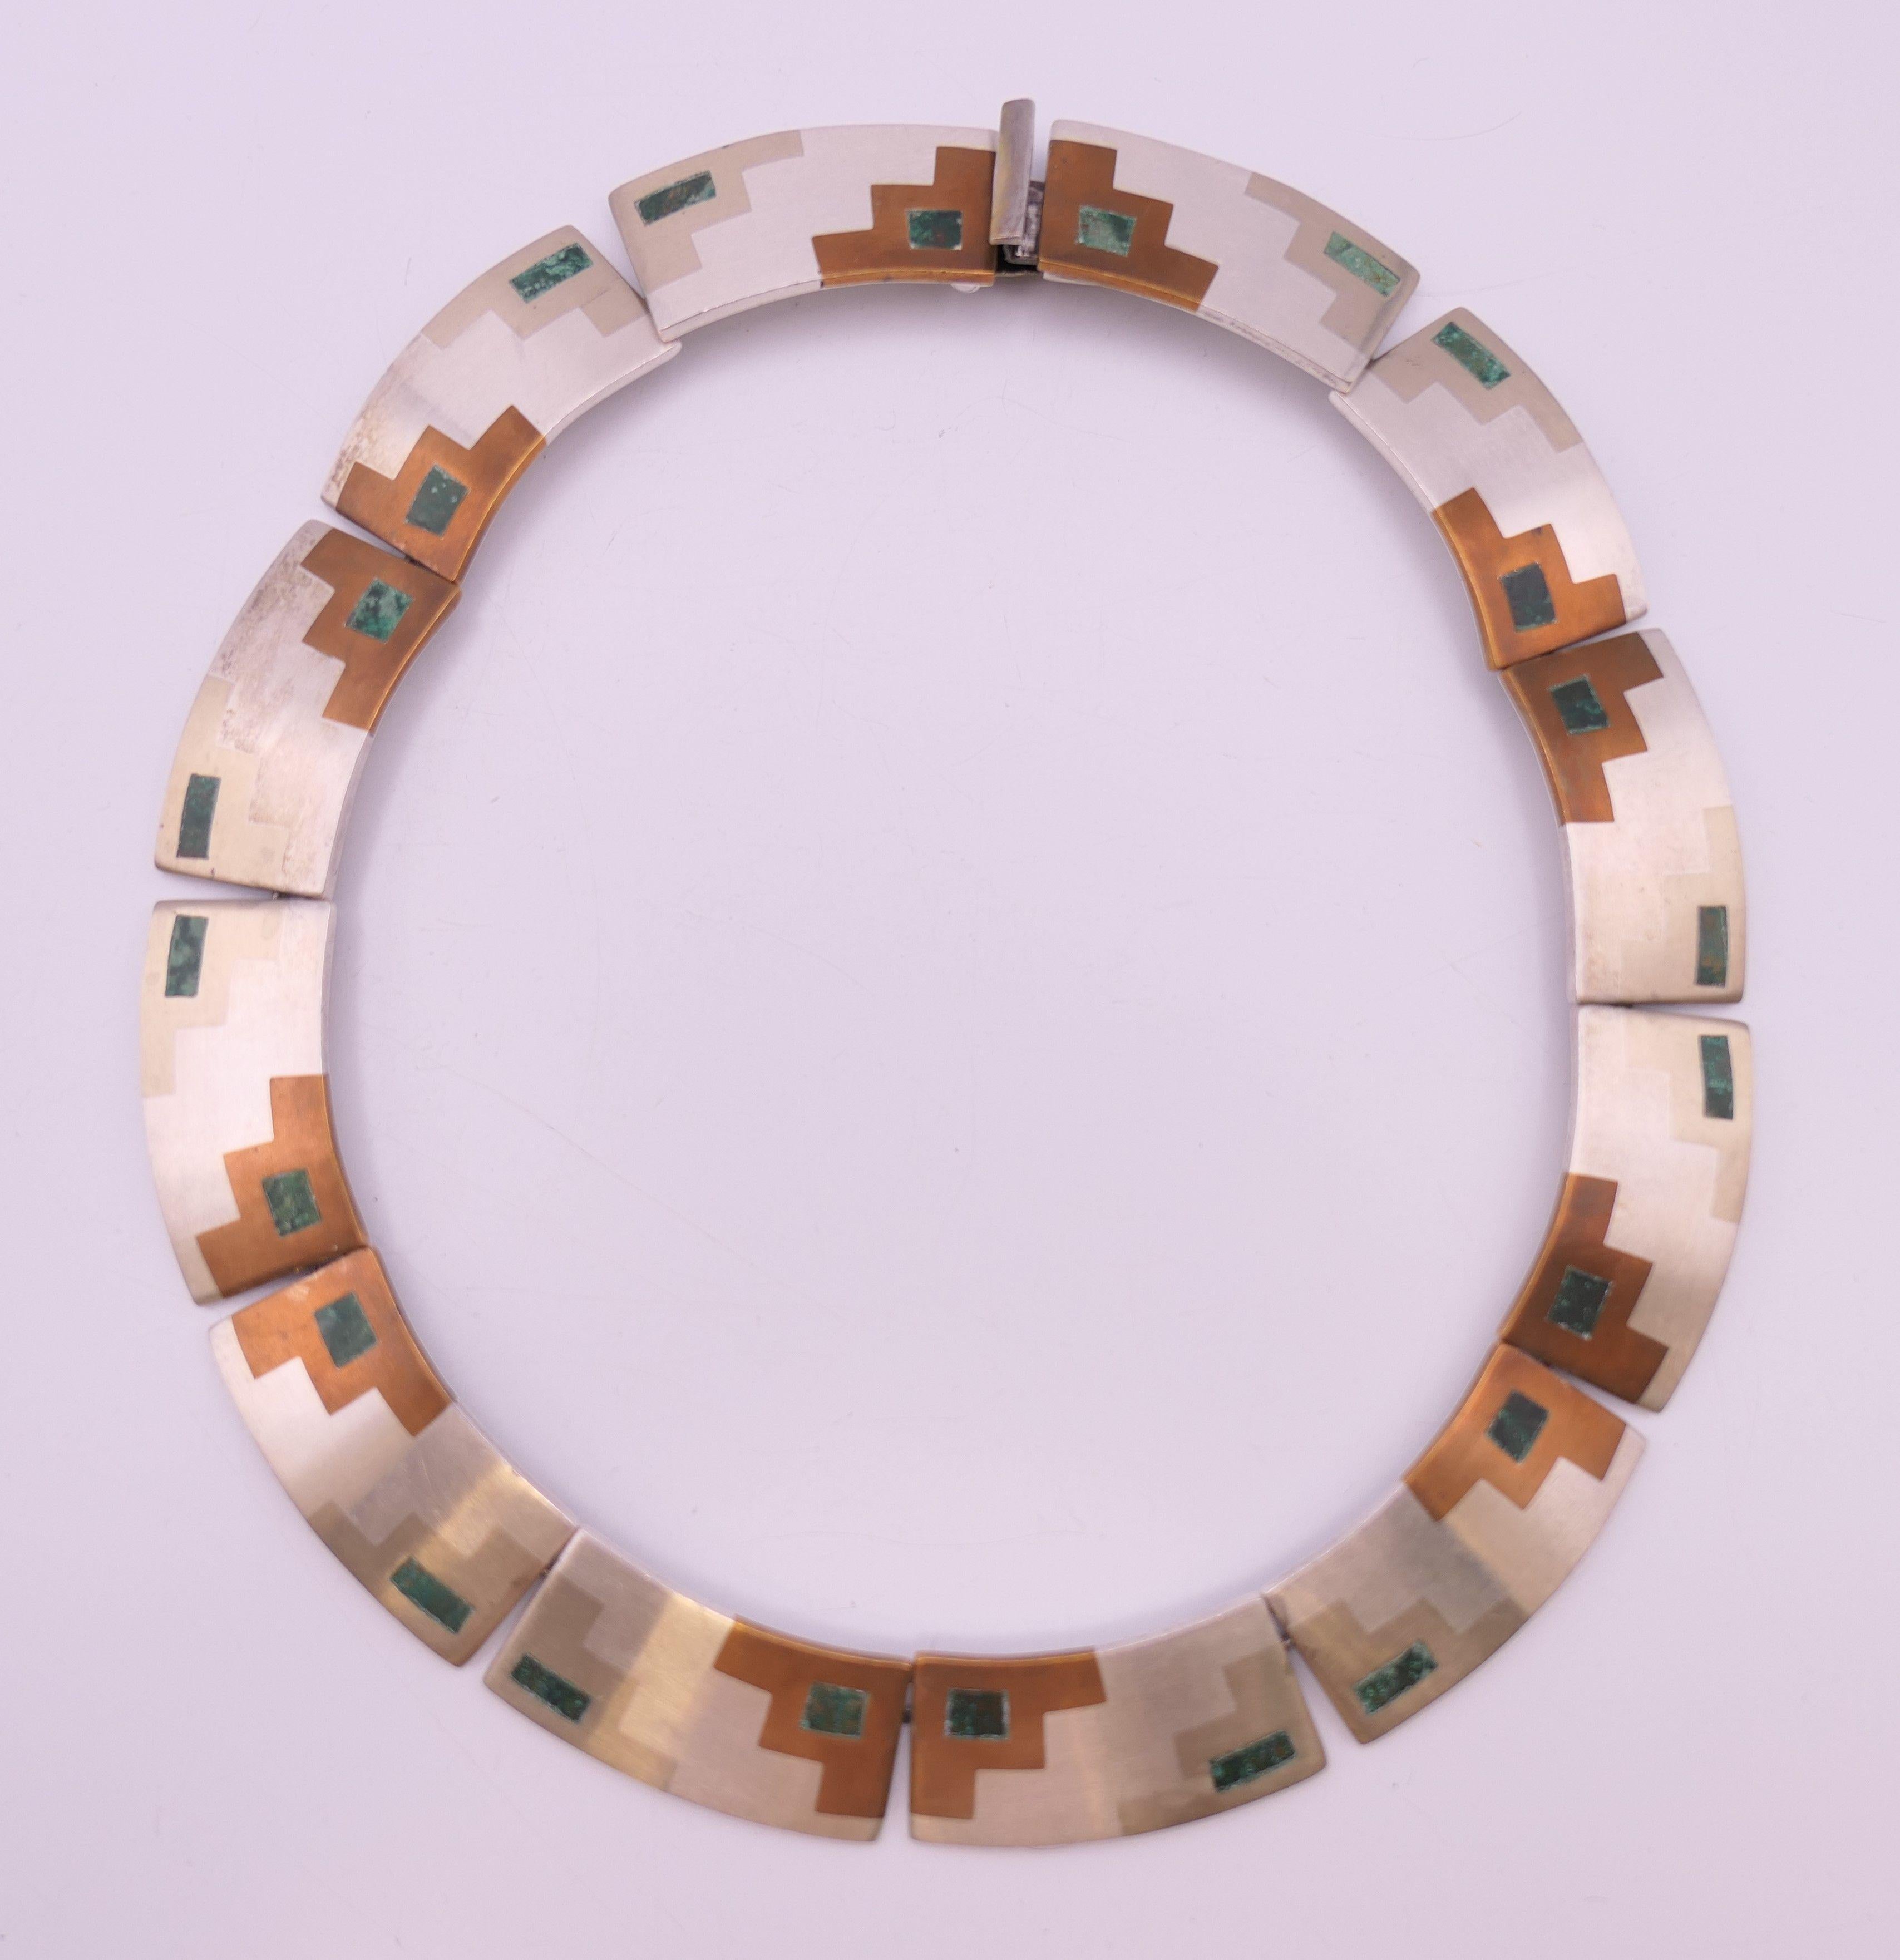 Beautiful Vintage Mexican Taxco silver Modernist design necklace with mixed metals and Abalone inlays
Marked  JL Metales 925 sterling mark
1960`s period
Fine condition.